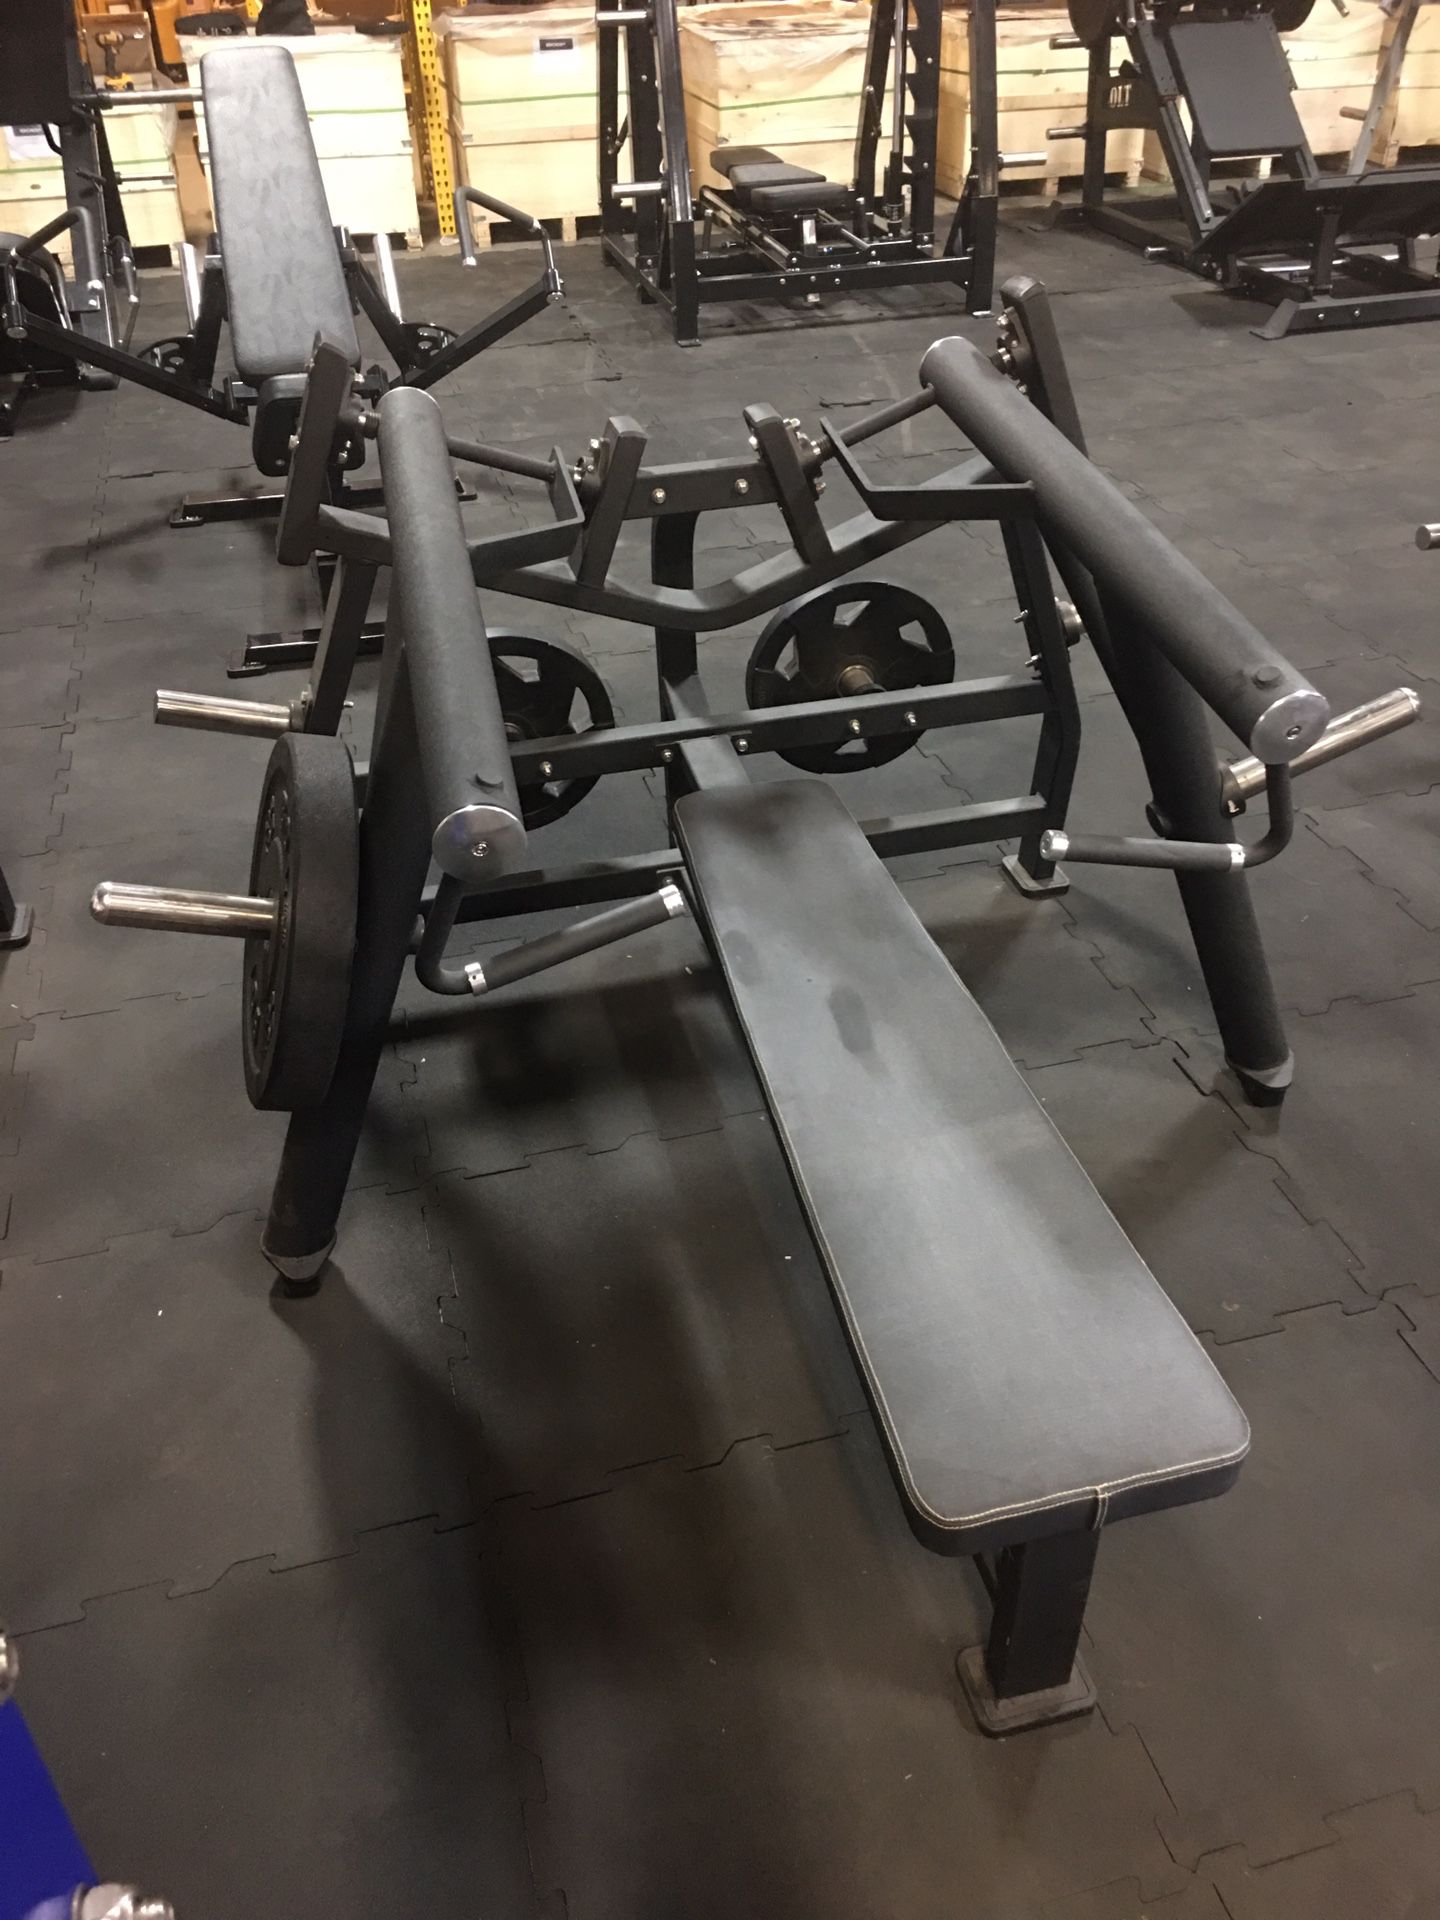 Plate Loaded Horizontal Chest Press